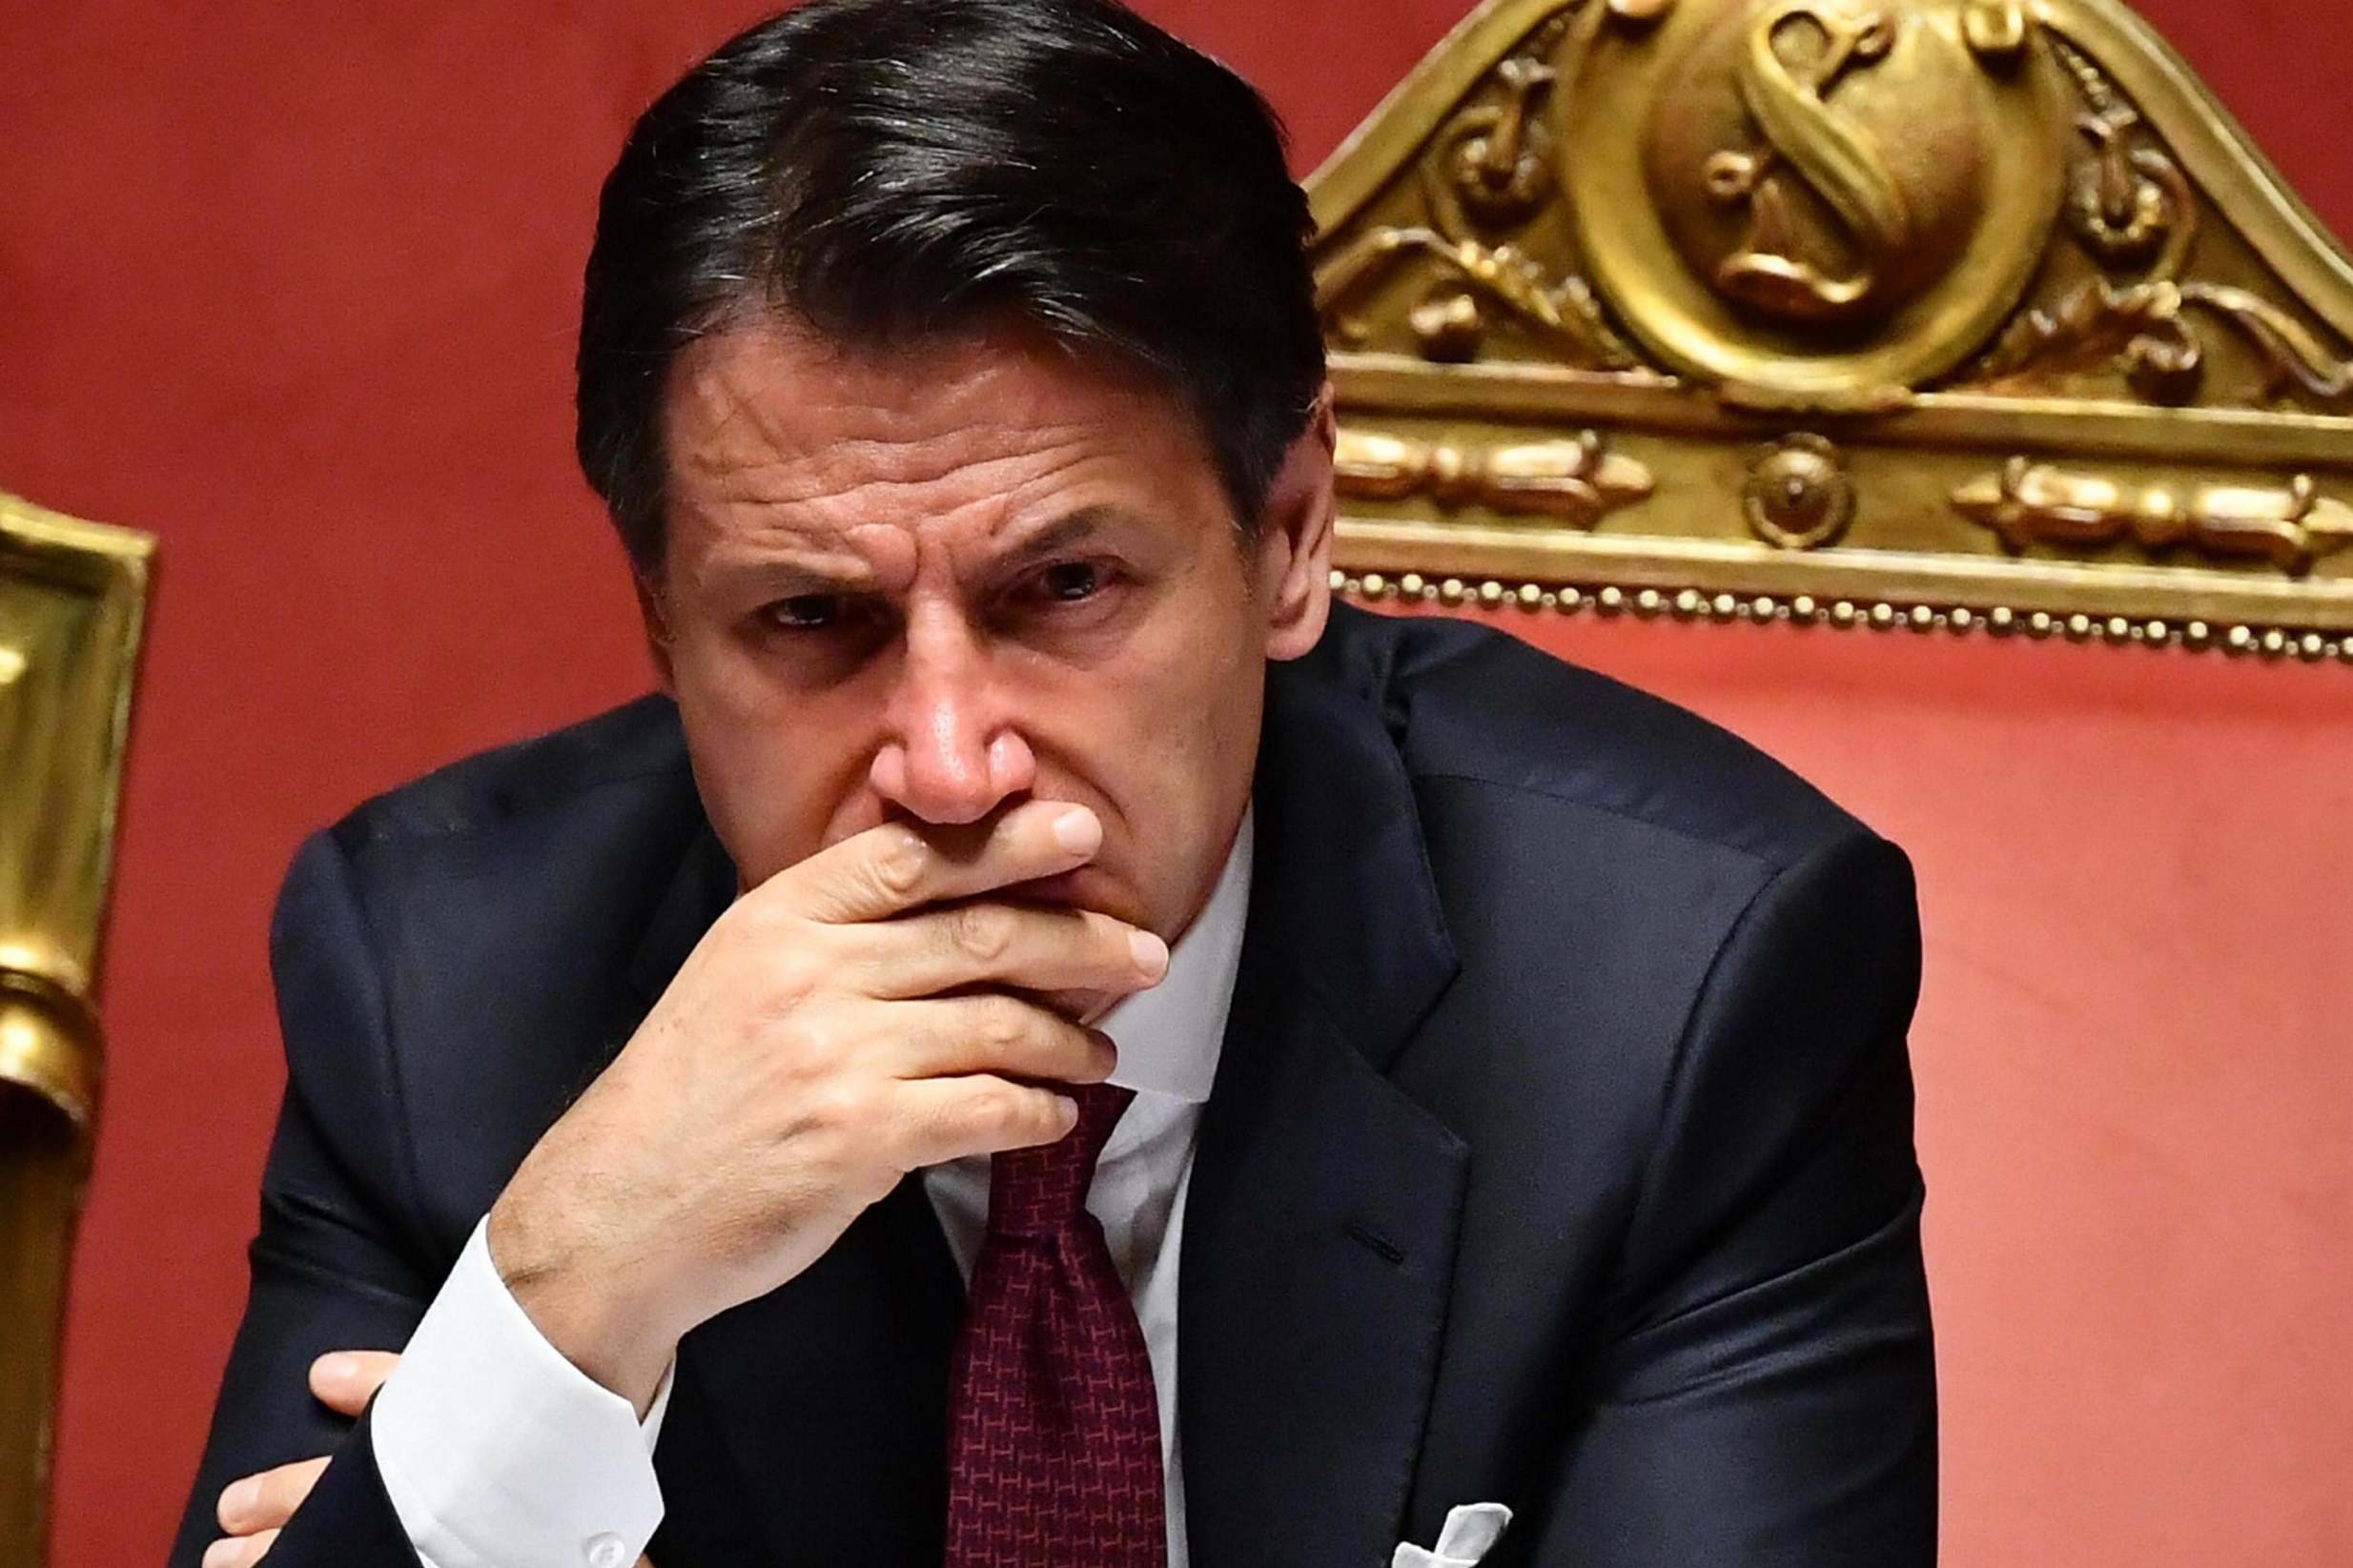 Giuseppe Conte looks on after he addressed the Senate in Rome